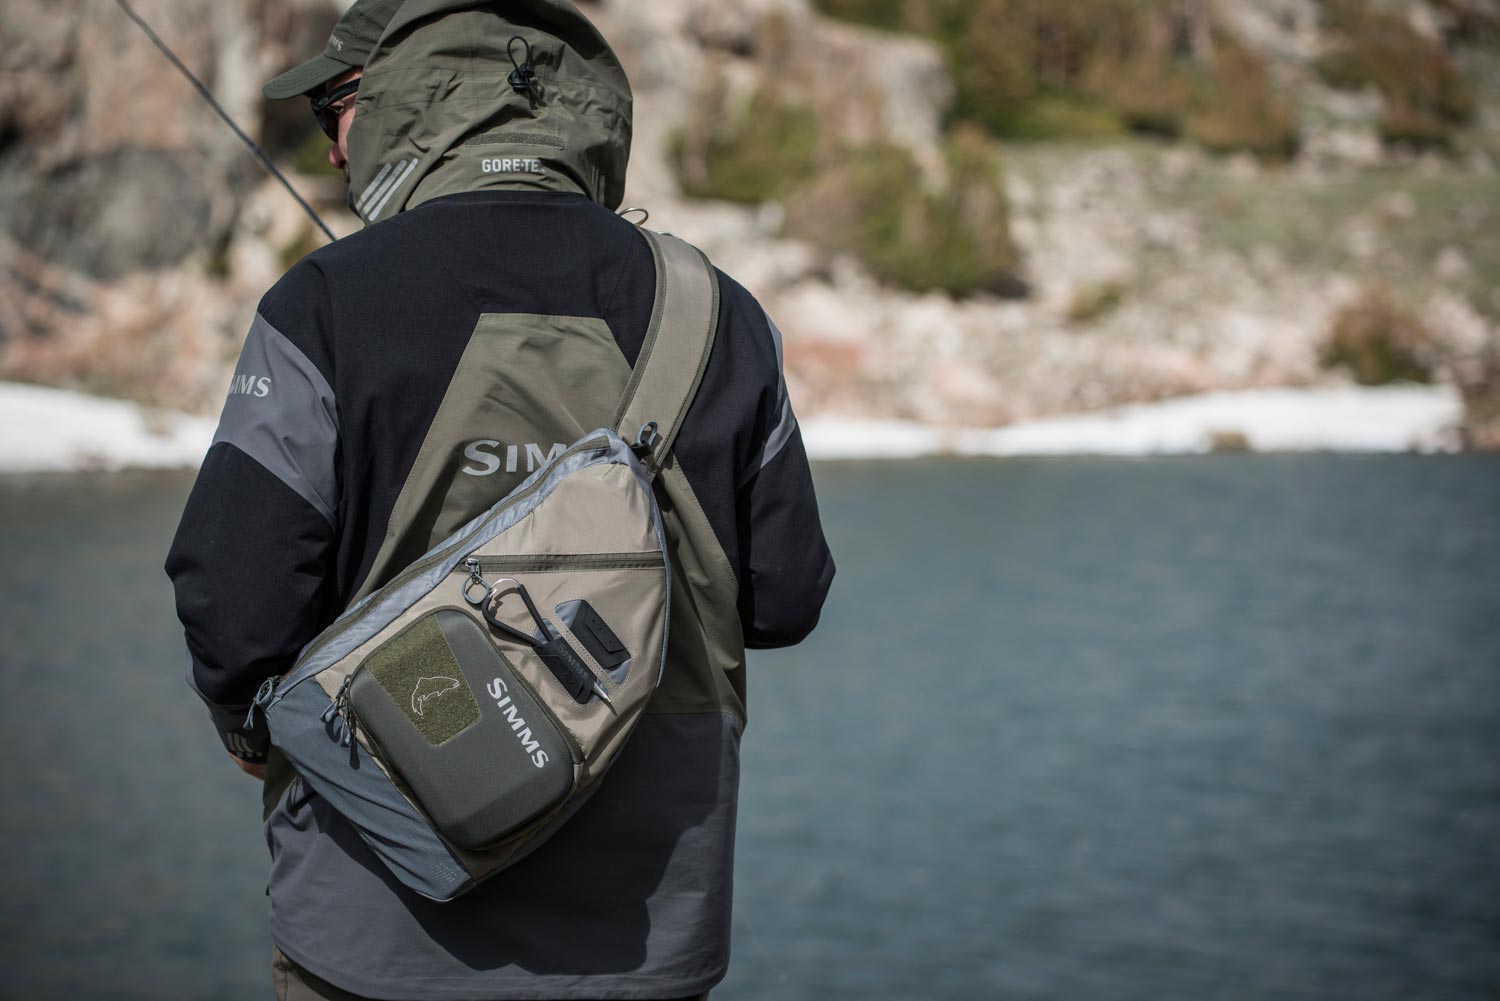 Sling Bags Are Worn Over One Shoulder, Sit Securely and Comfortably on Your Back, and Easily Swing to Your Front to Access Your Tackle, Snacks, and Anything Else You Have Stored Away. Great for Long Walks and Covering Water.